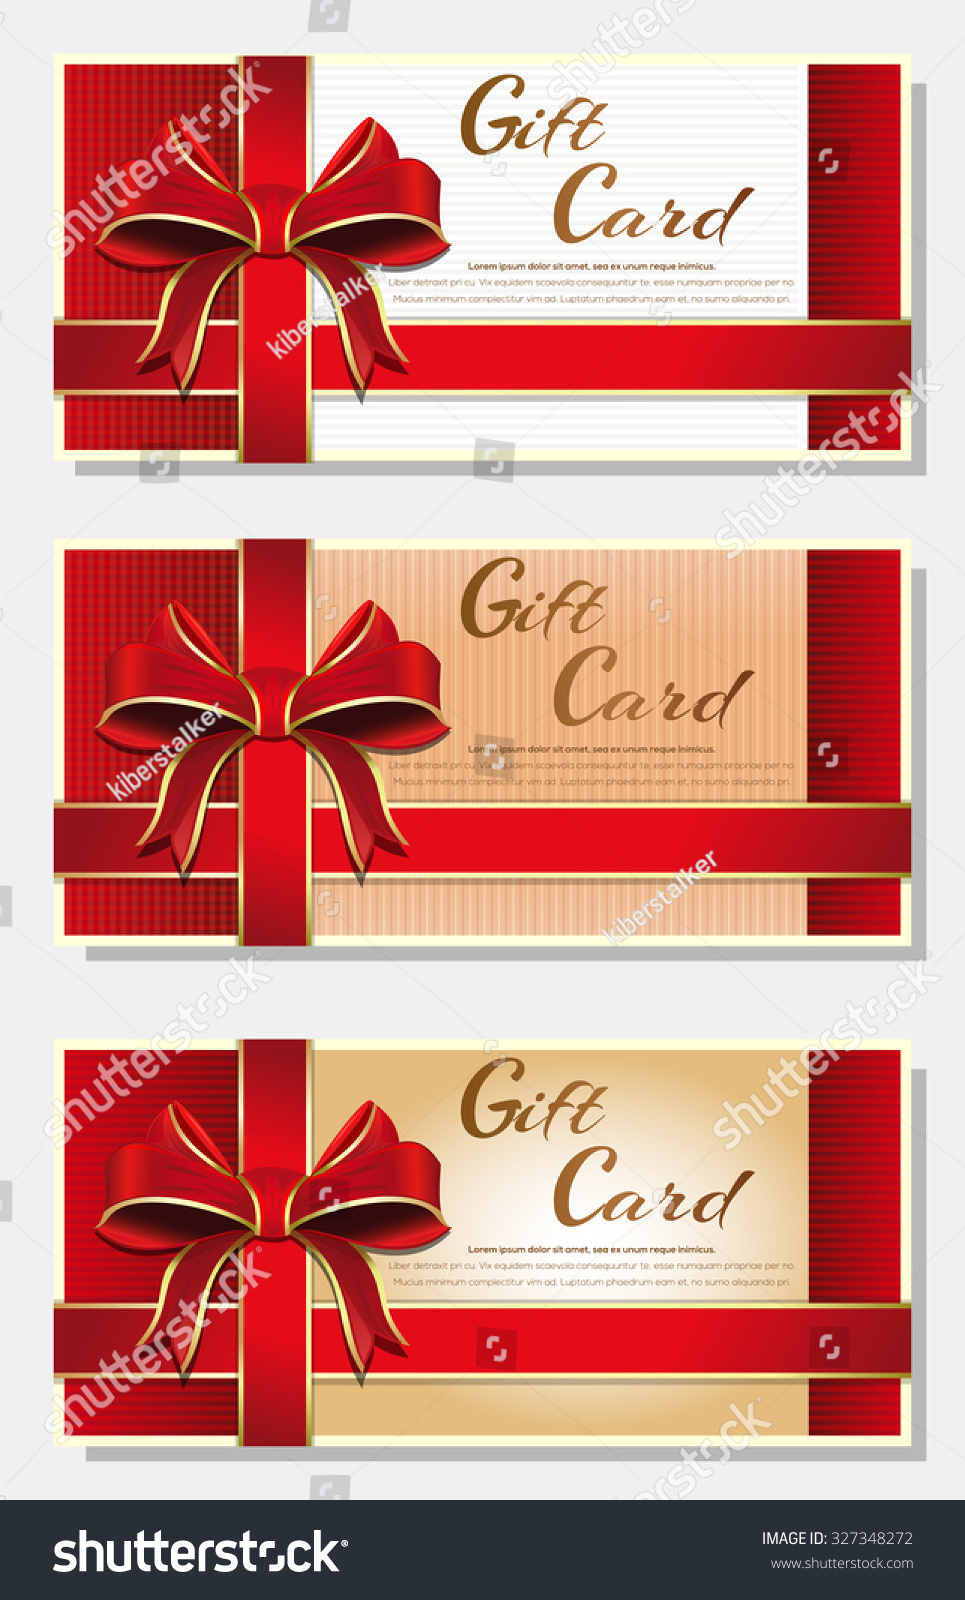 Gift cards with red ribbons and bows templates collection vector background set 5